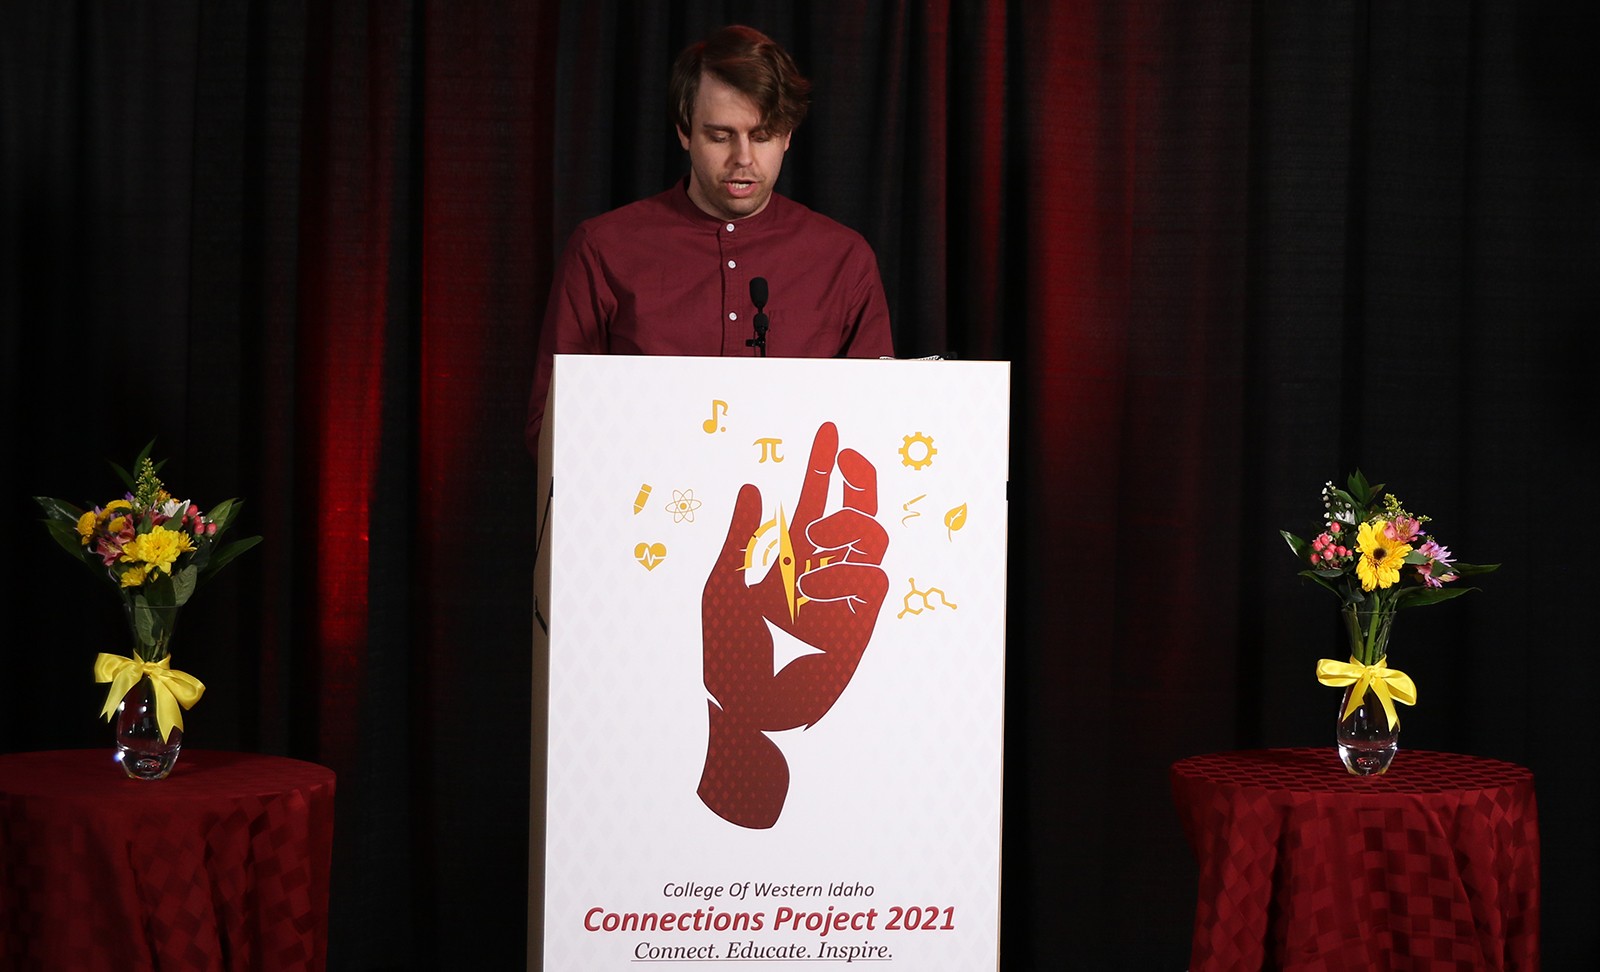 CWI student, Will Young, presenting the Connections Excellence Awards during the 2021 Connections Project event.